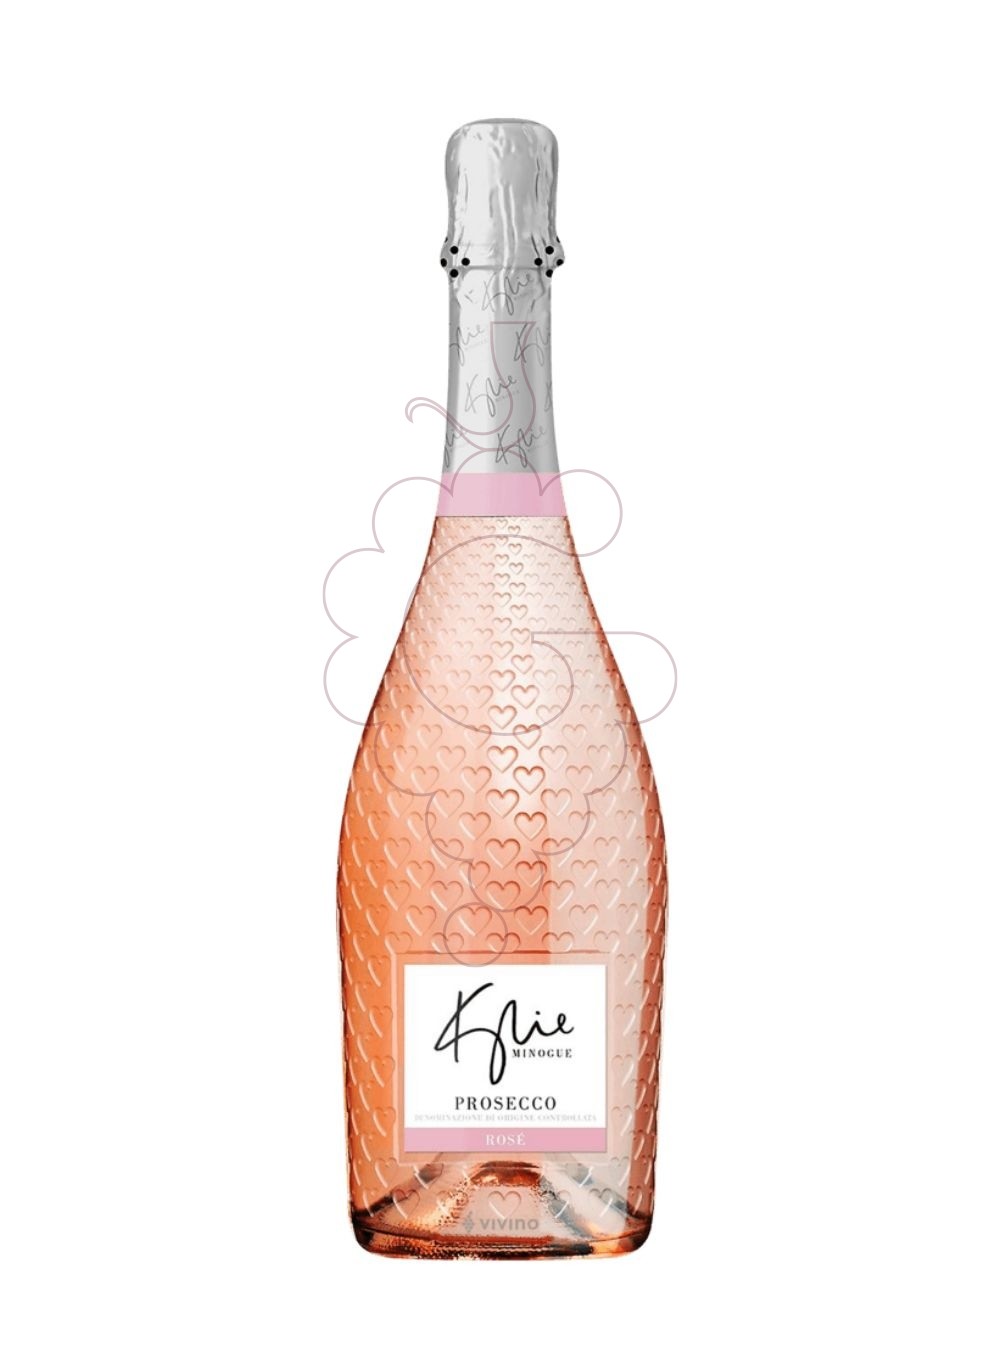 Photo Kylie minogue prosecco rose sparkling wine